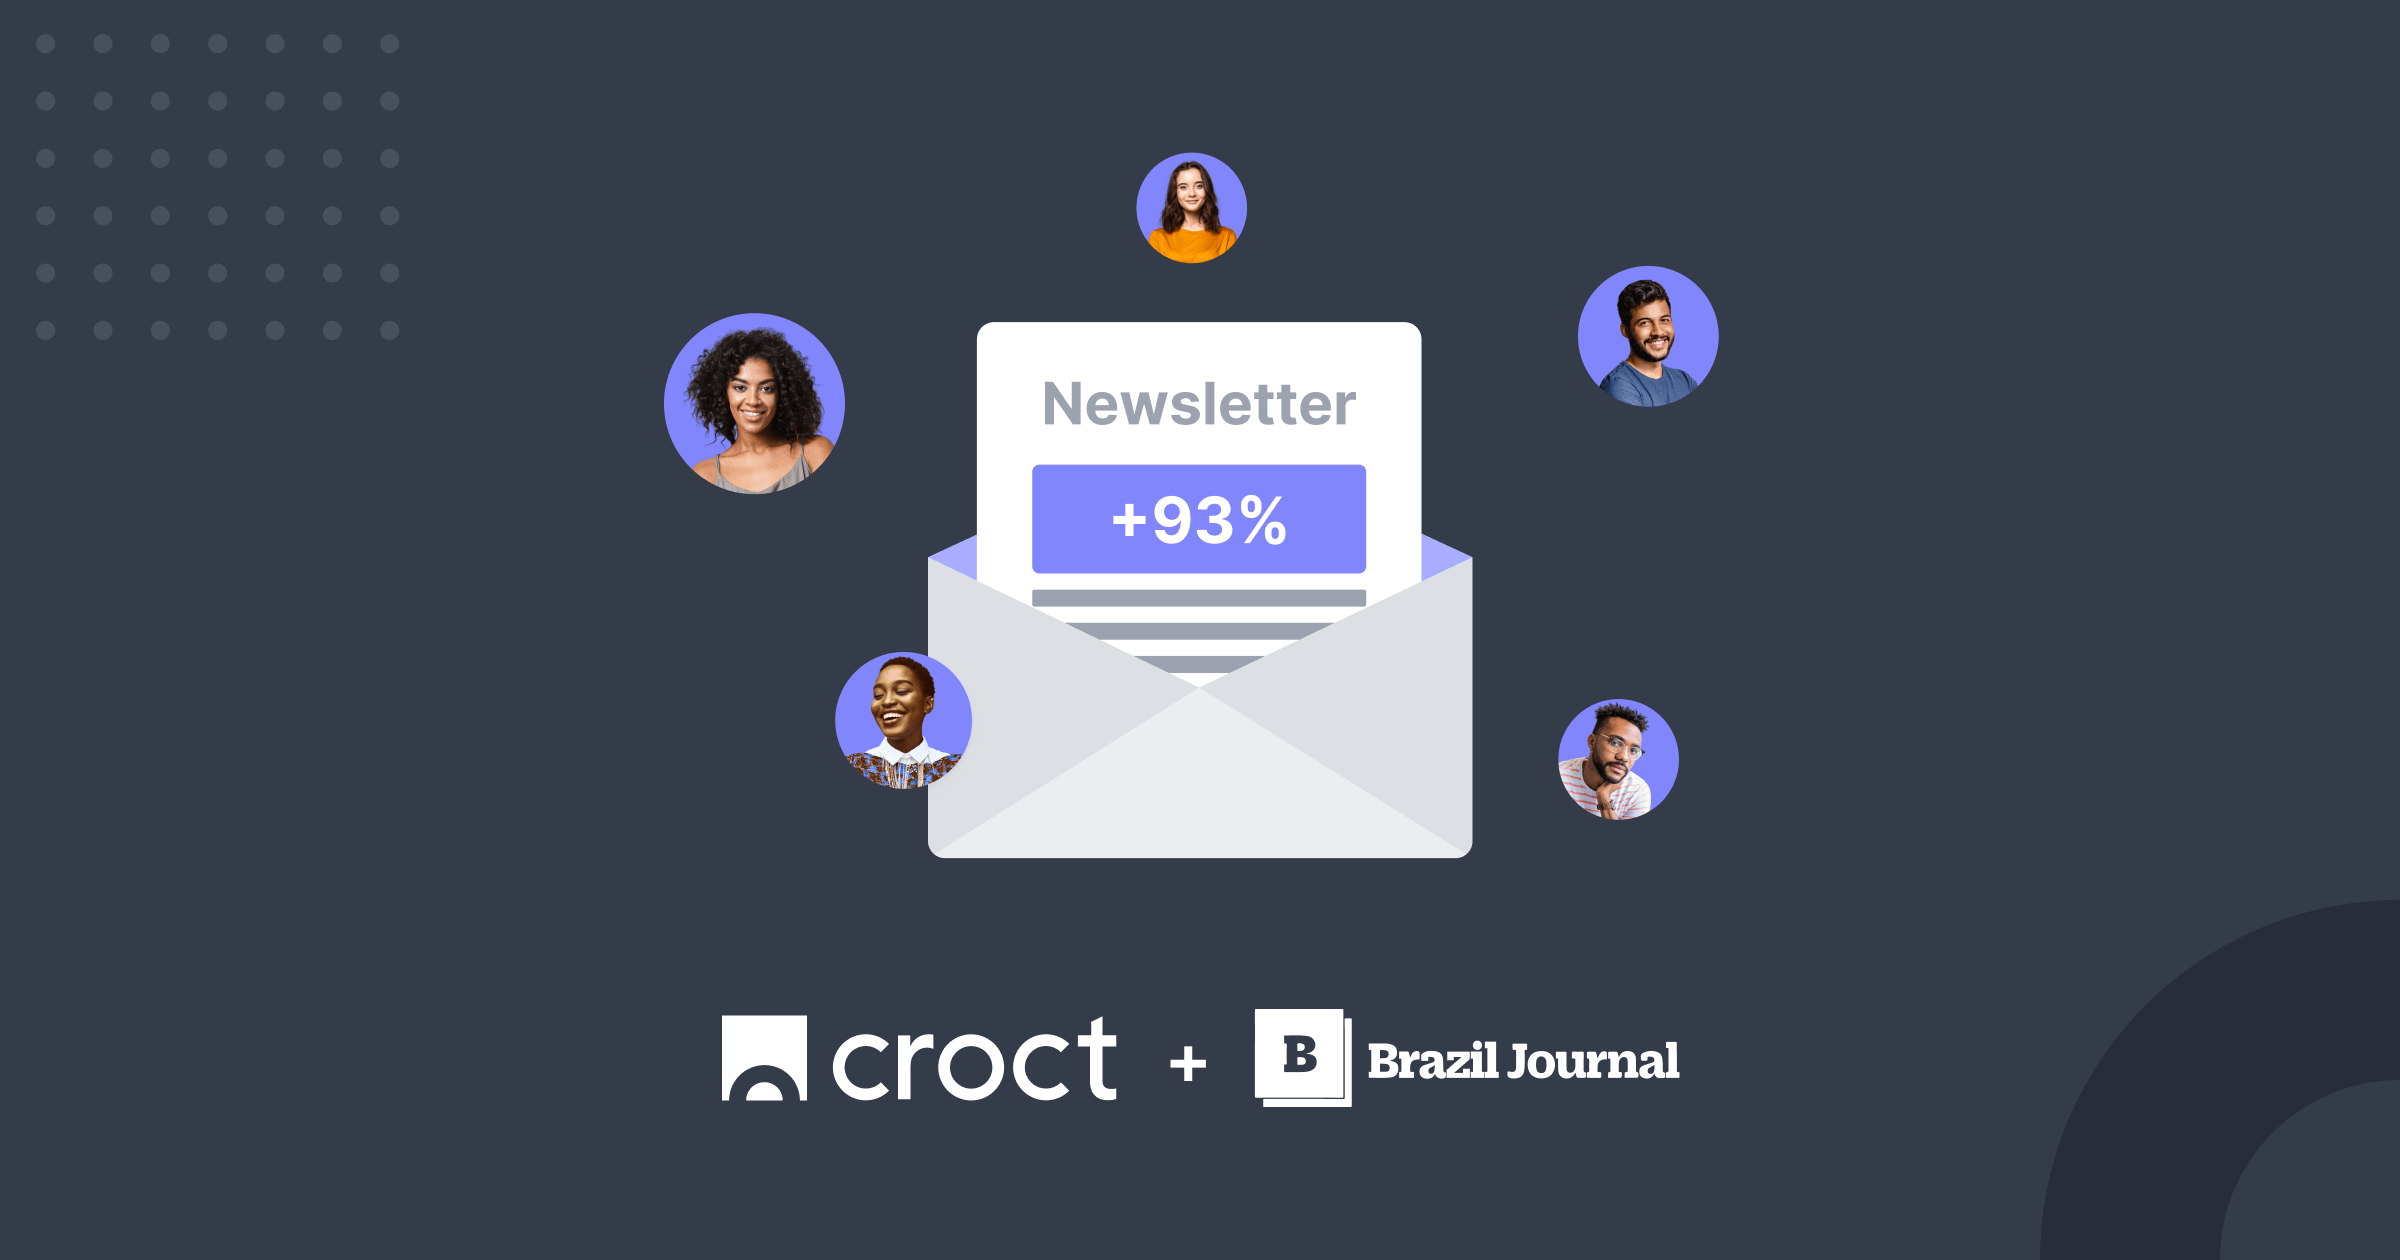 Newsletter coming out of an envelope surrounded by Brazil Journal's logo and user avatars.